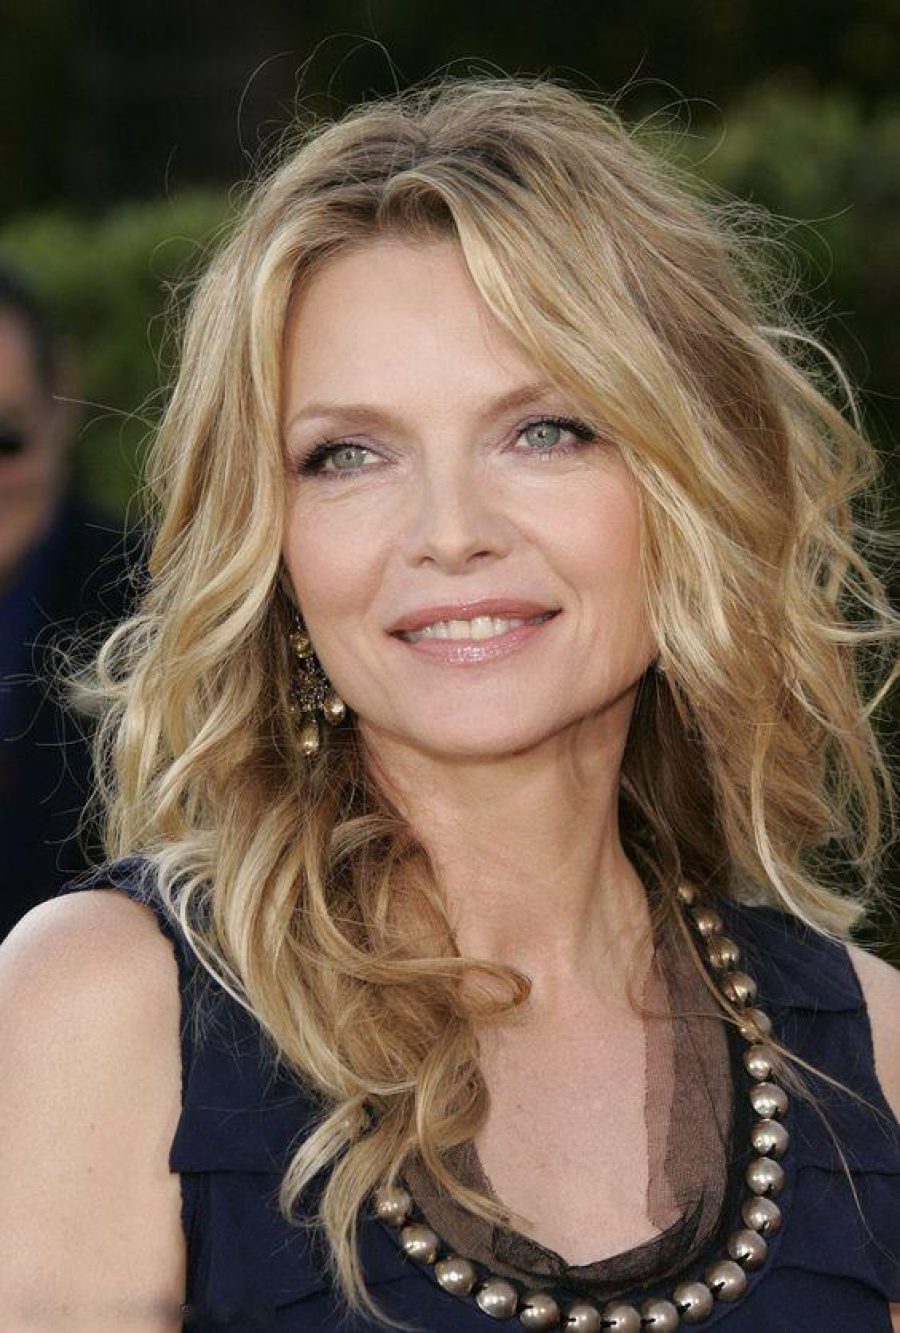 See Need Want Beauty How To Look Ten Years Younger Michelle Pfeiffer Pinterest